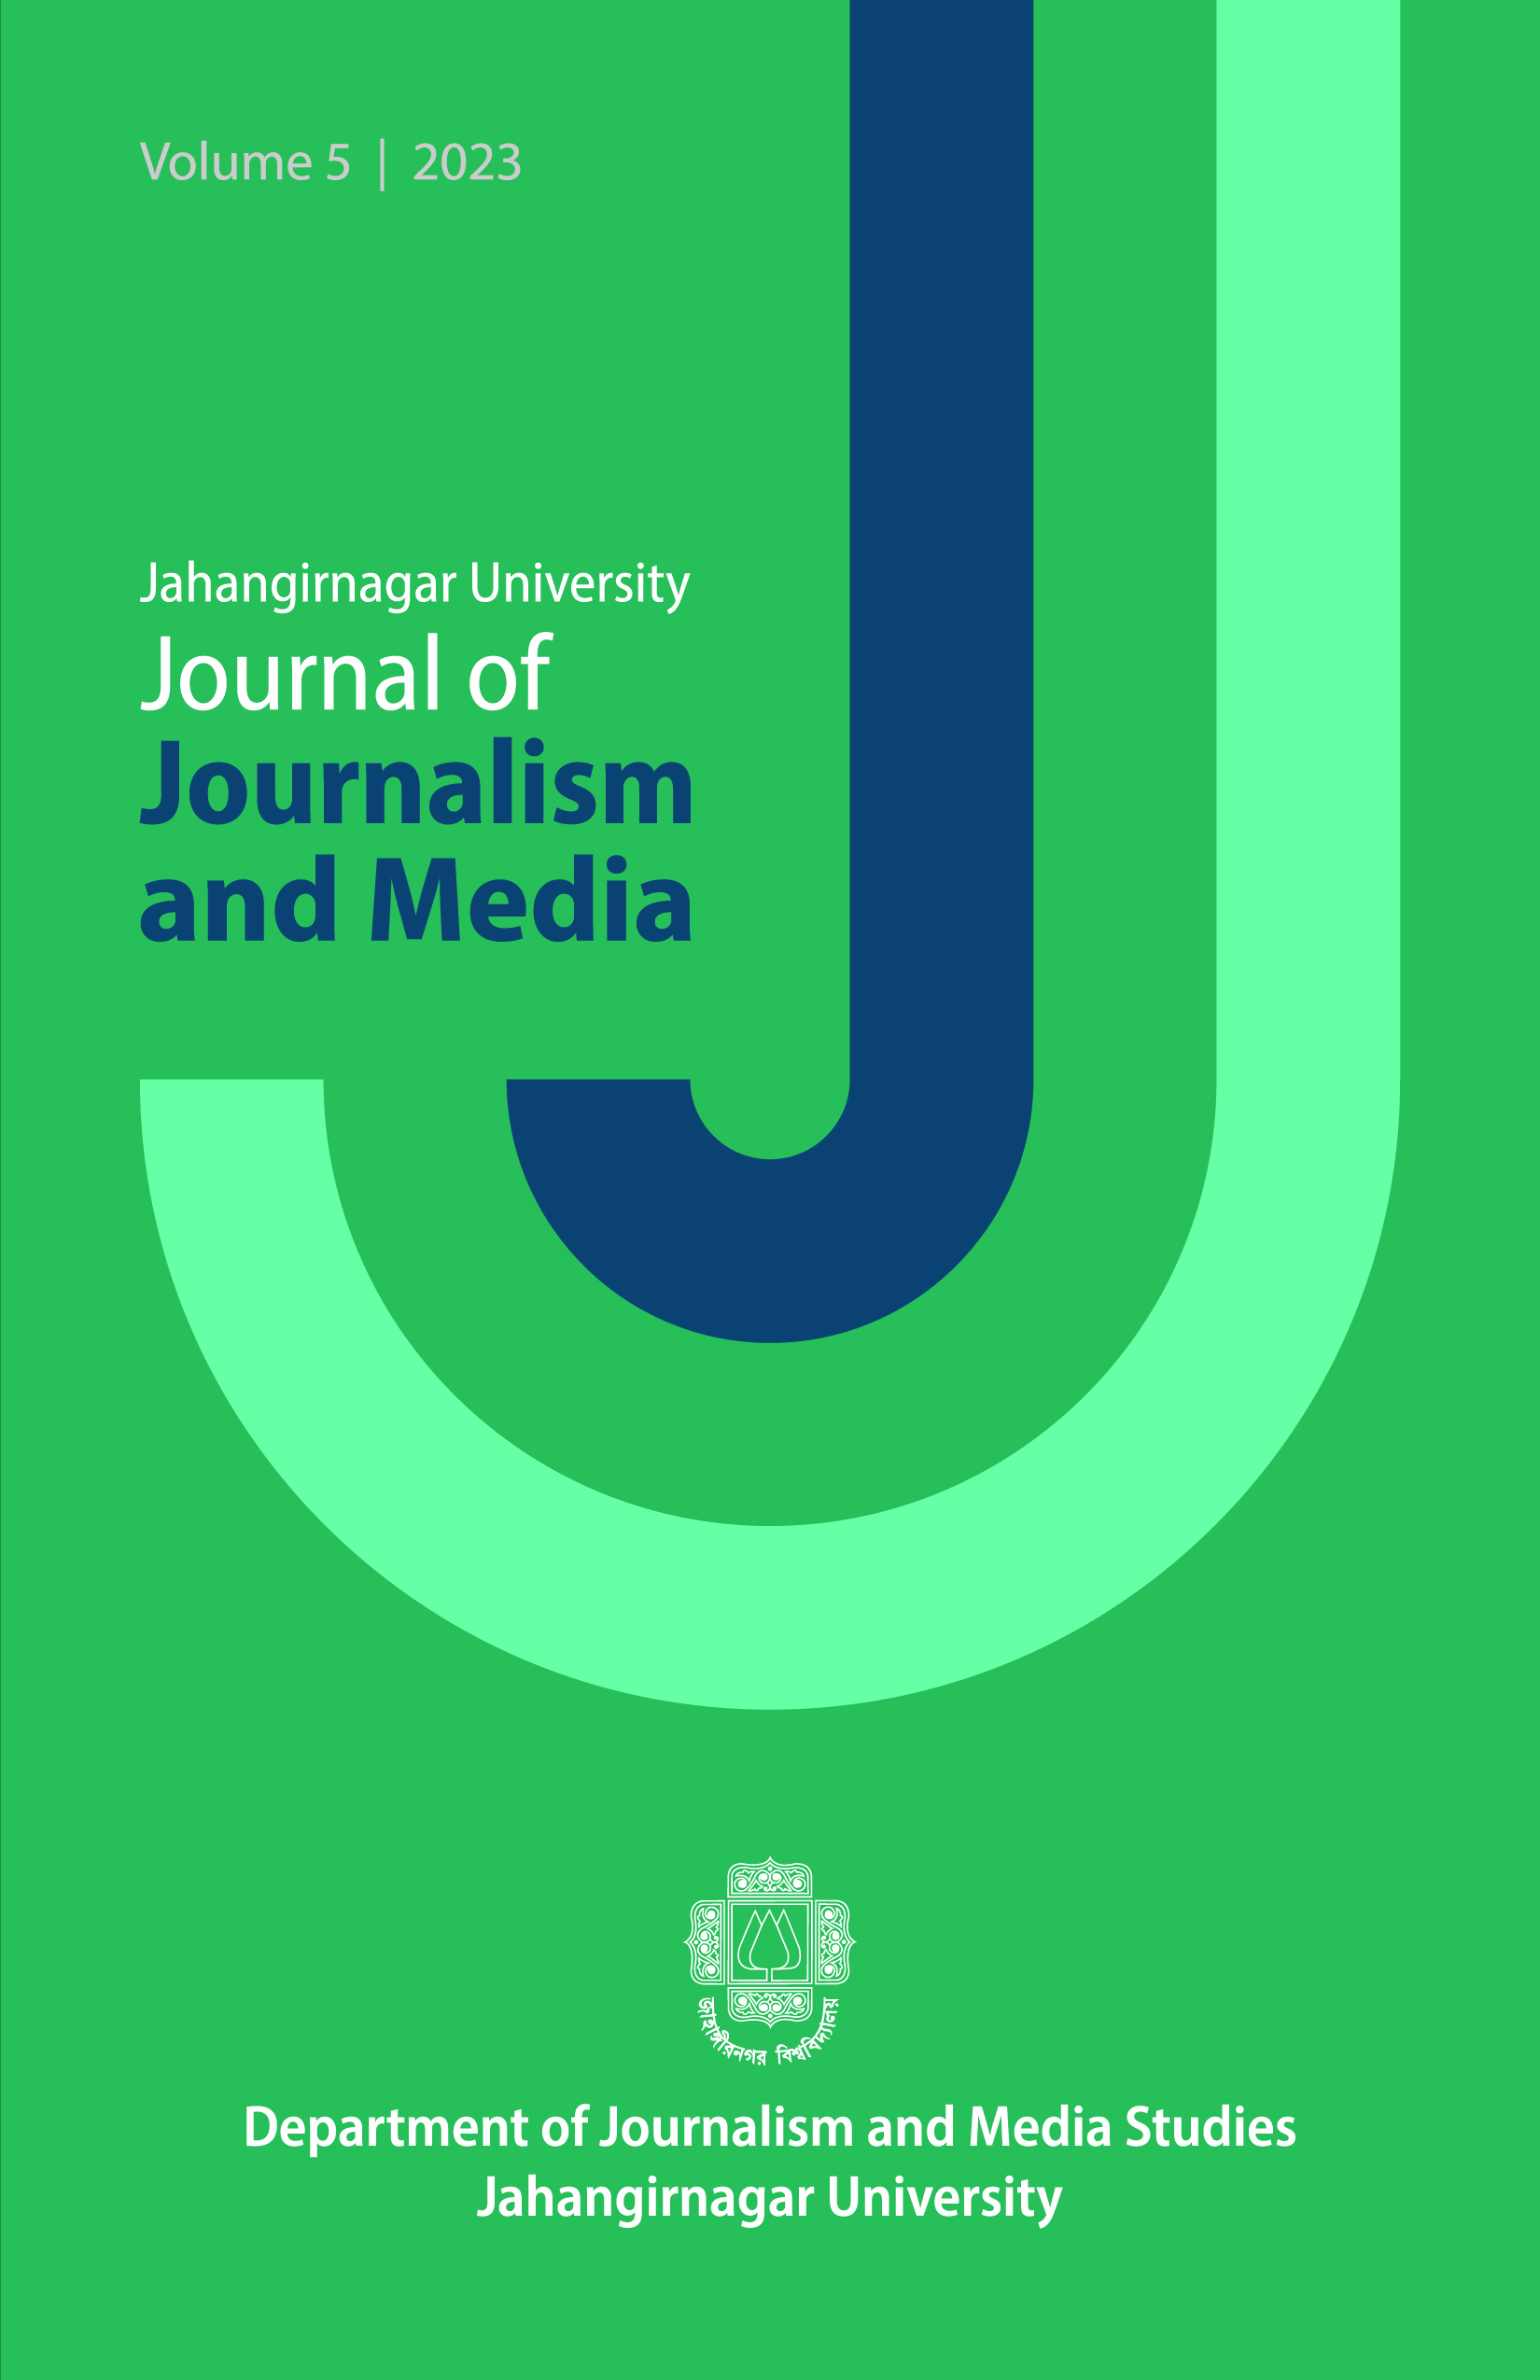 Journal of Journalism and Media